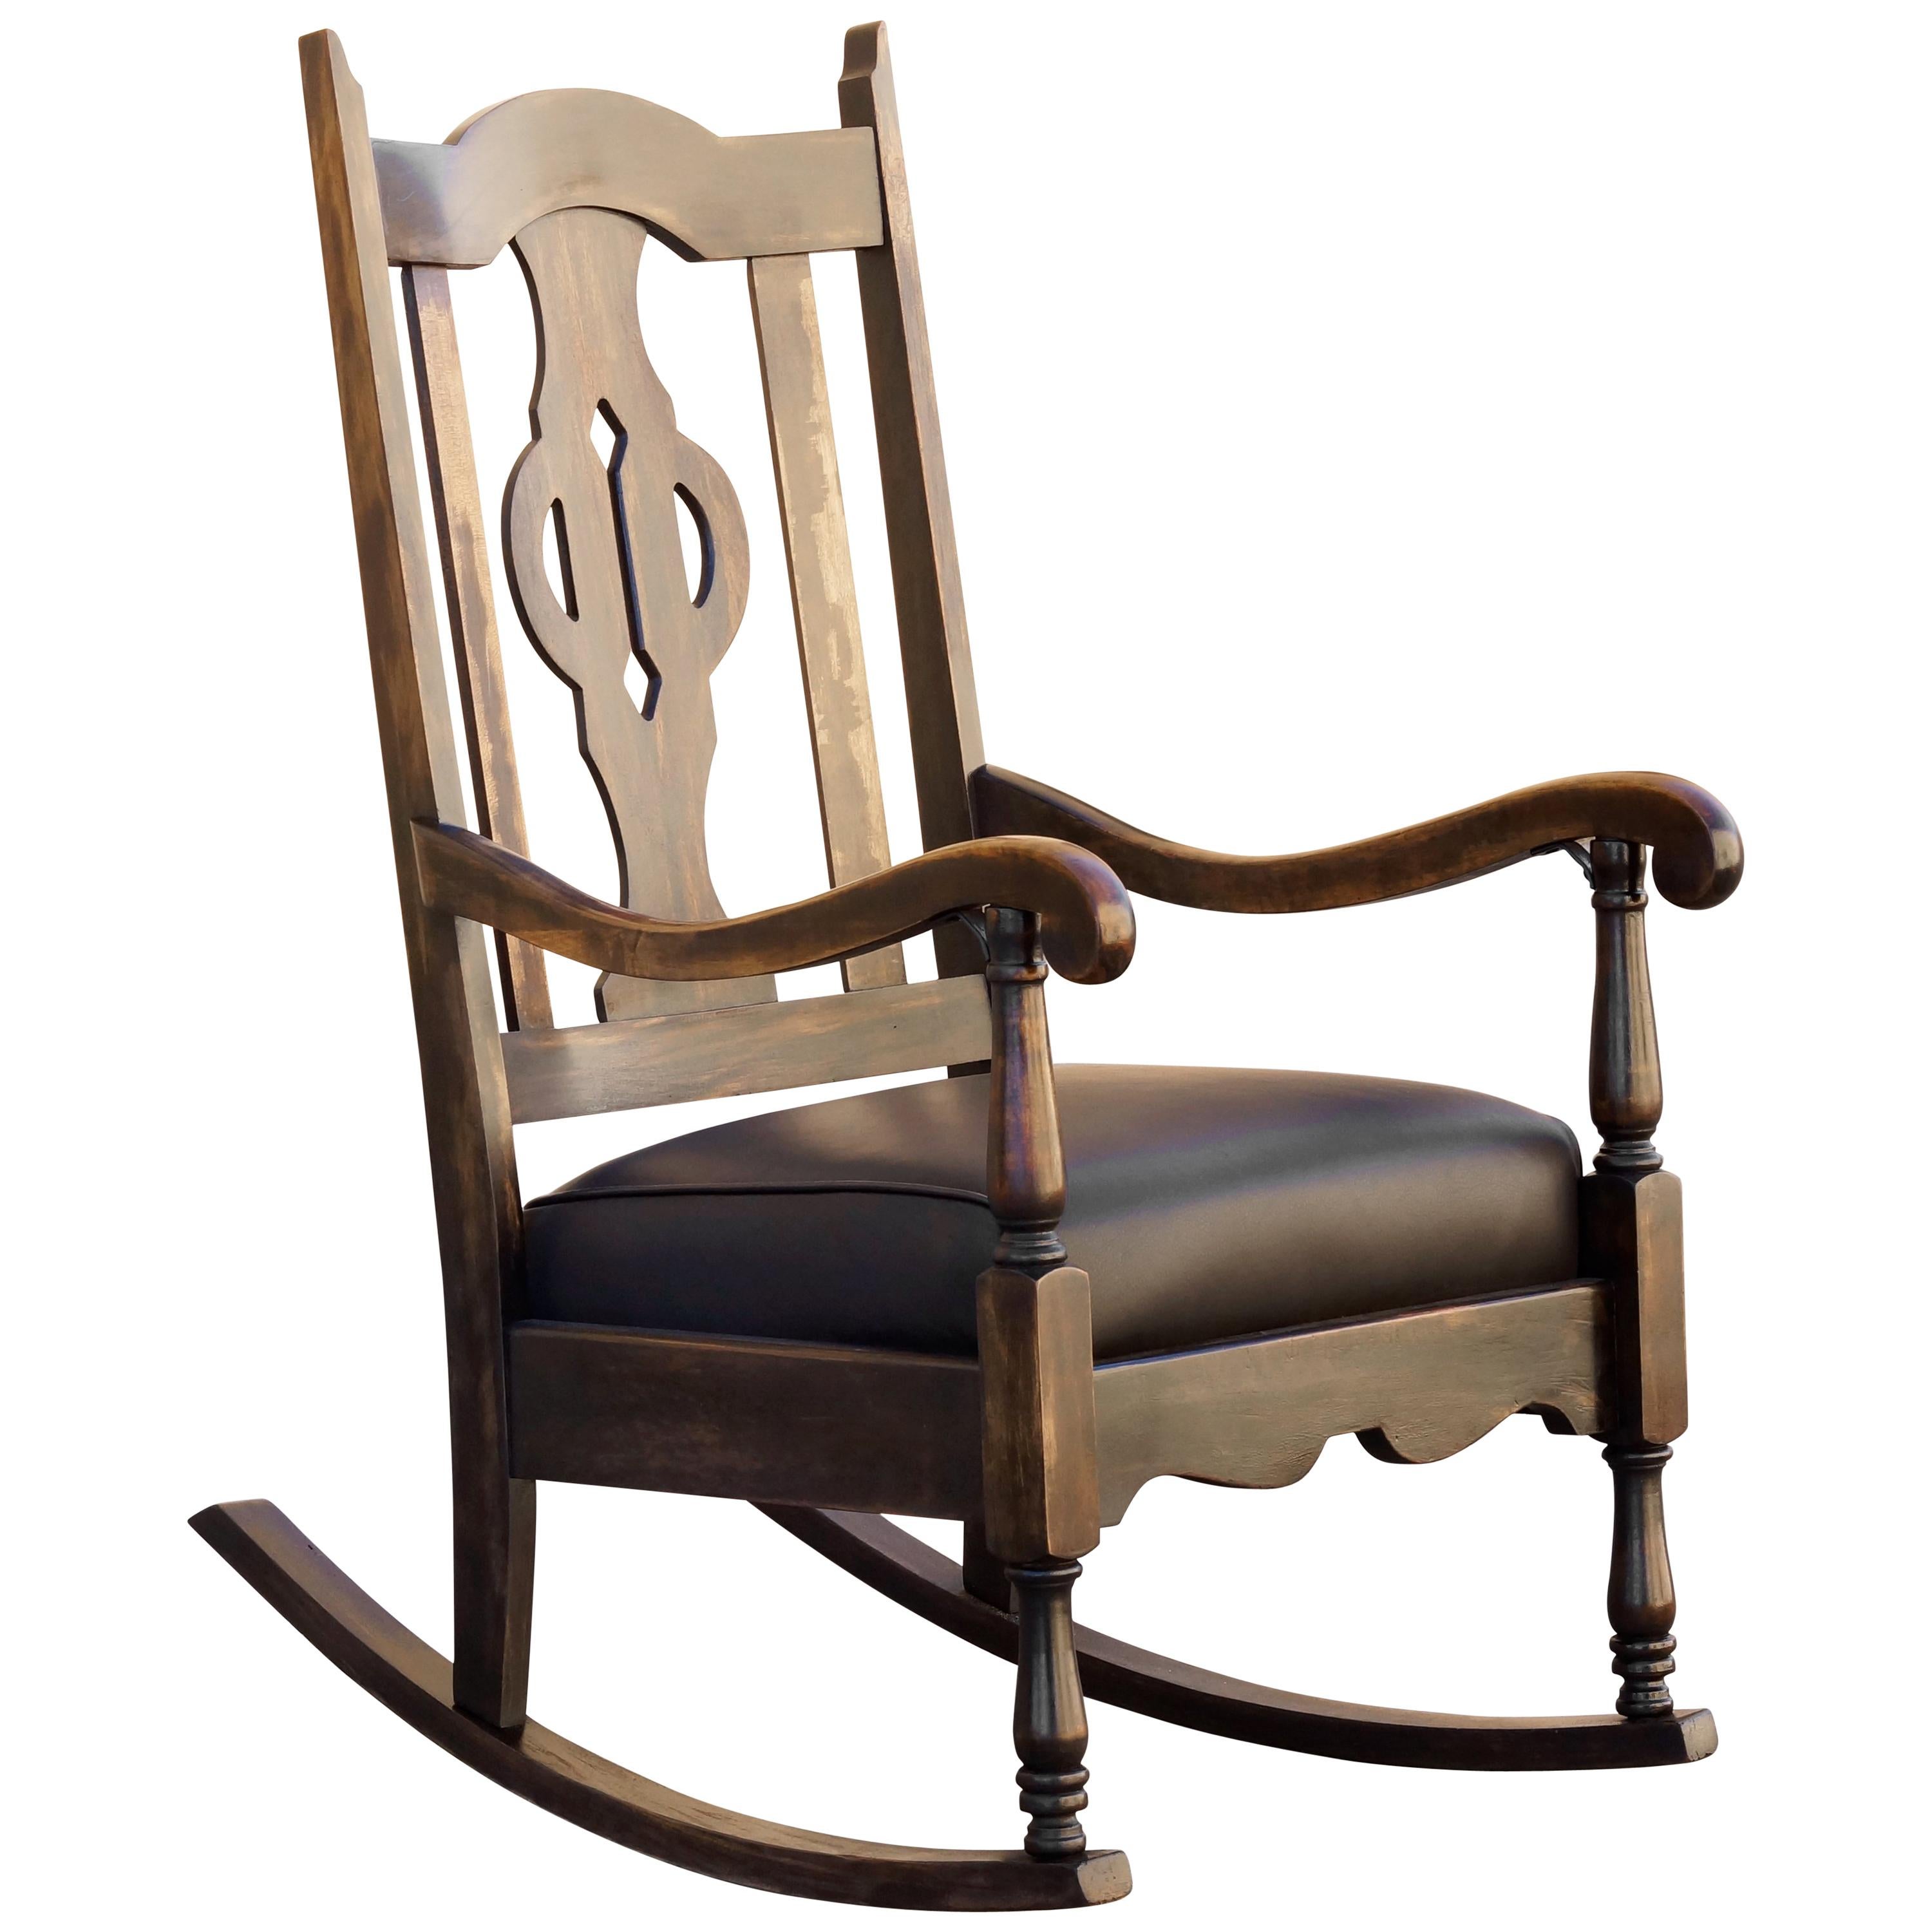 Antique Mission Style Rocking Chair, Refinished Maple and Leather